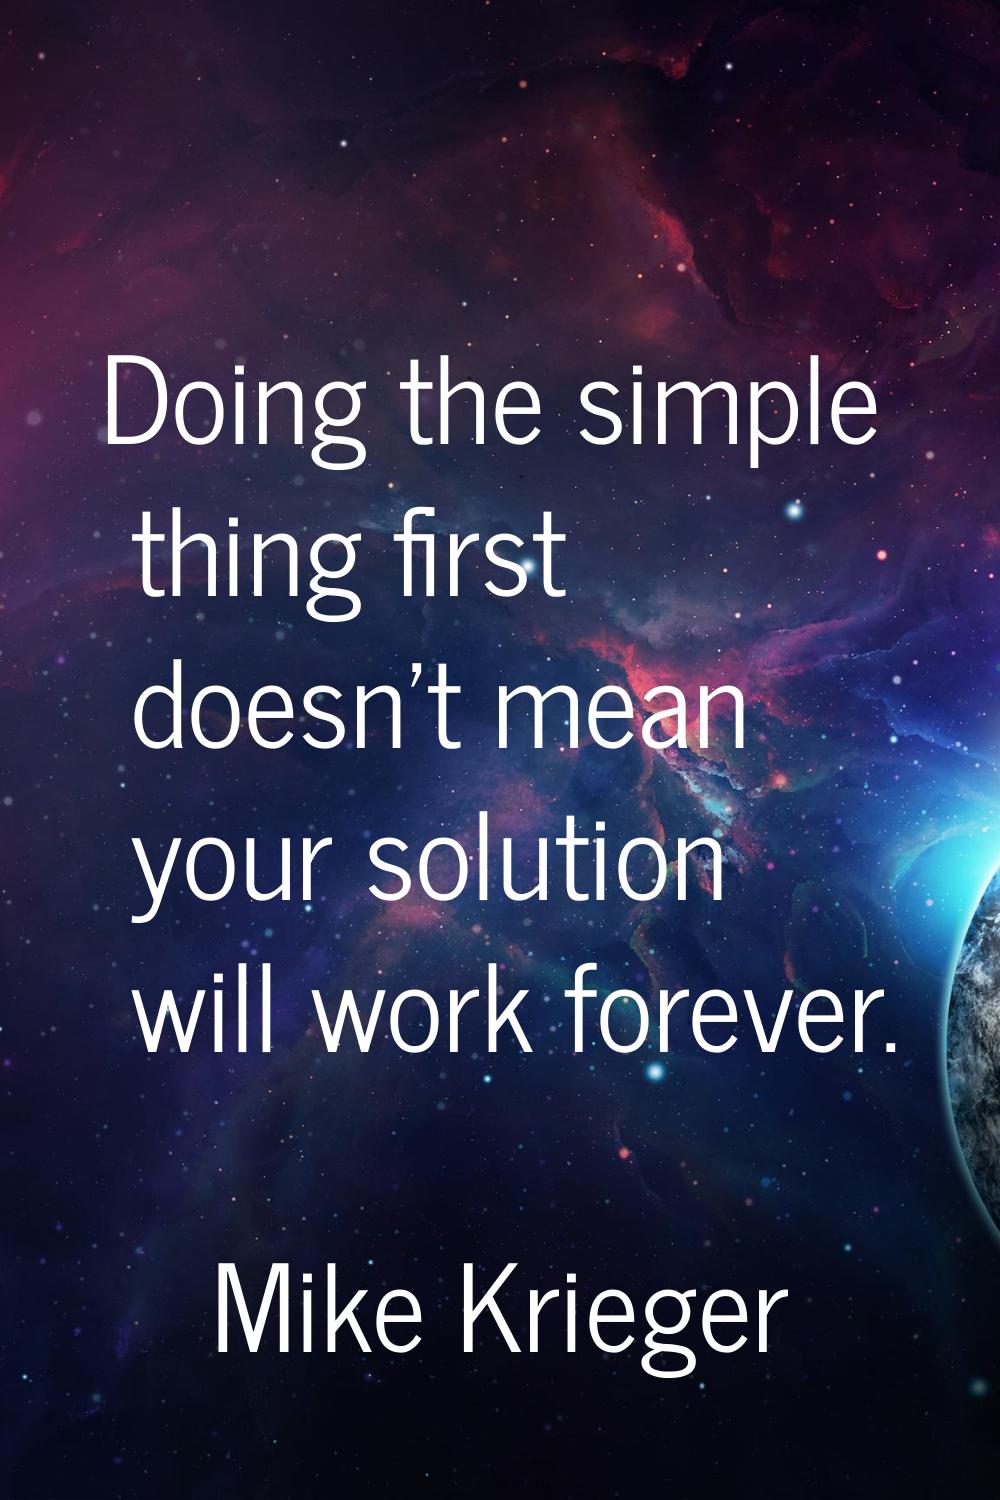 Doing the simple thing first doesn't mean your solution will work forever.